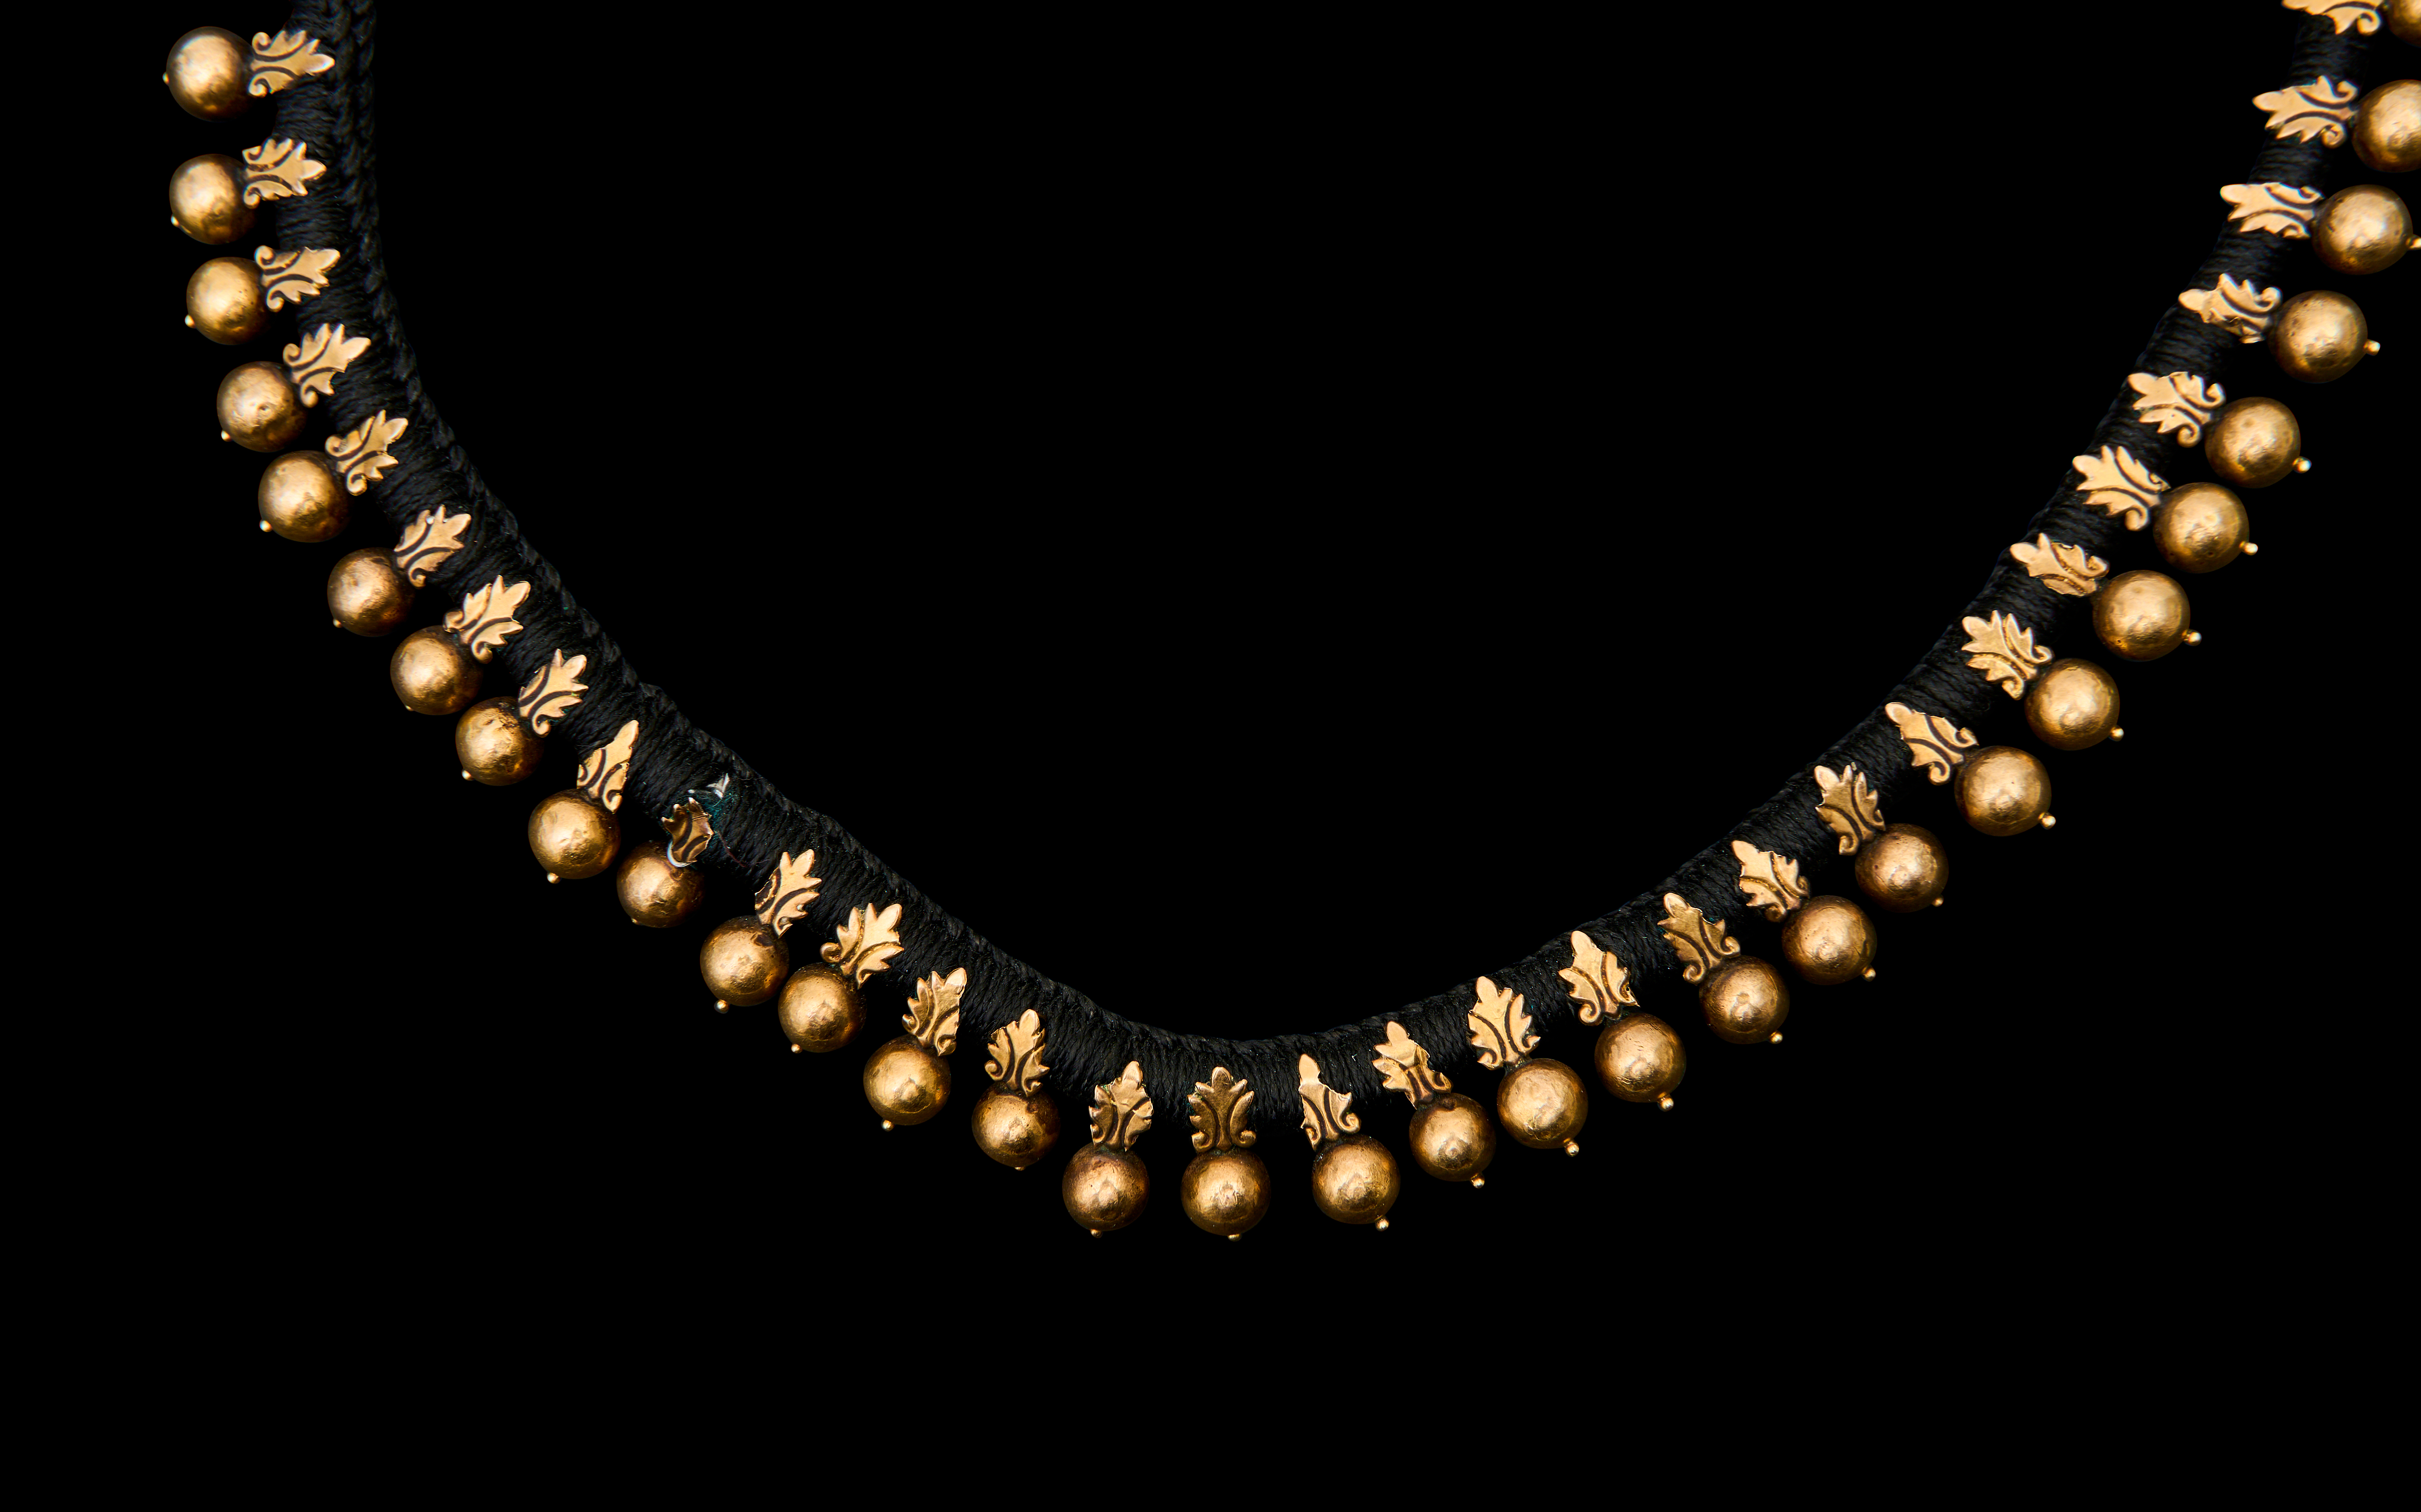 A MUGHAL GOLD NECKLACE, 19TH CENTURY, INDIA - Image 3 of 3